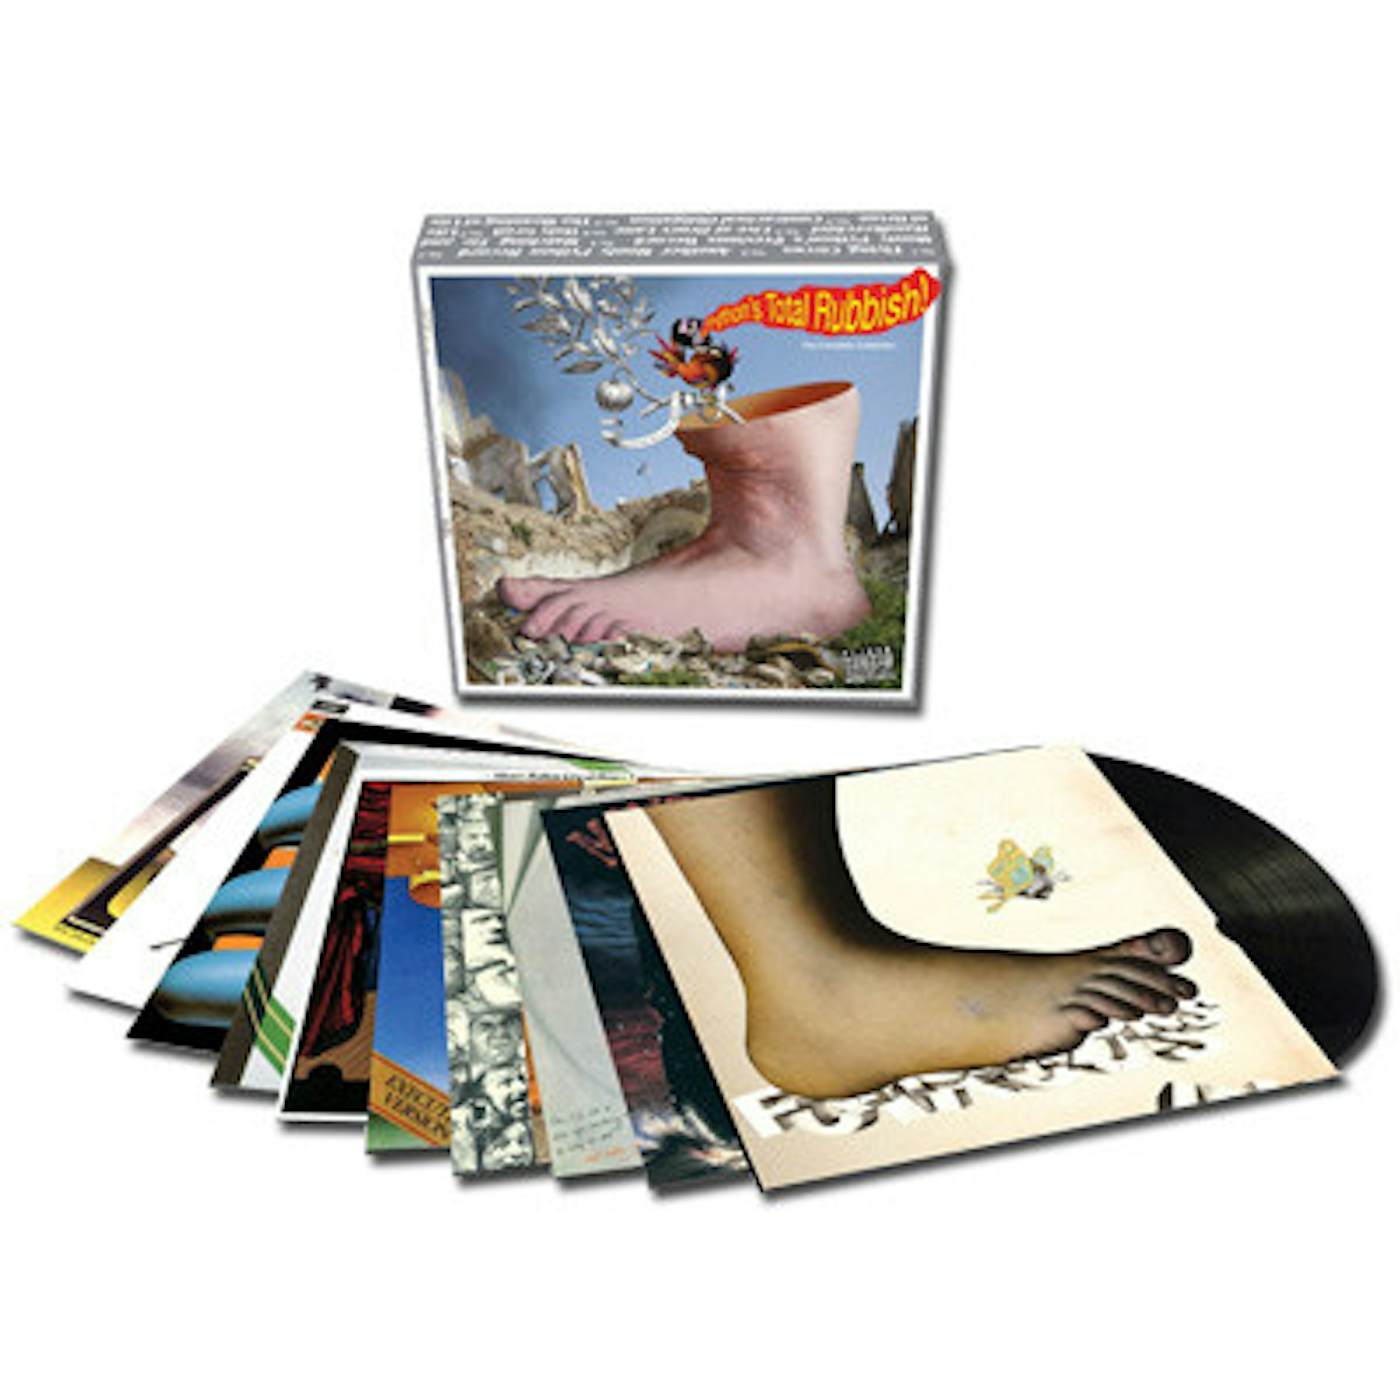 MONTY PYTHON'S TOTAL RUBBISH: COMPLETE COLLECTION Vinyl Record